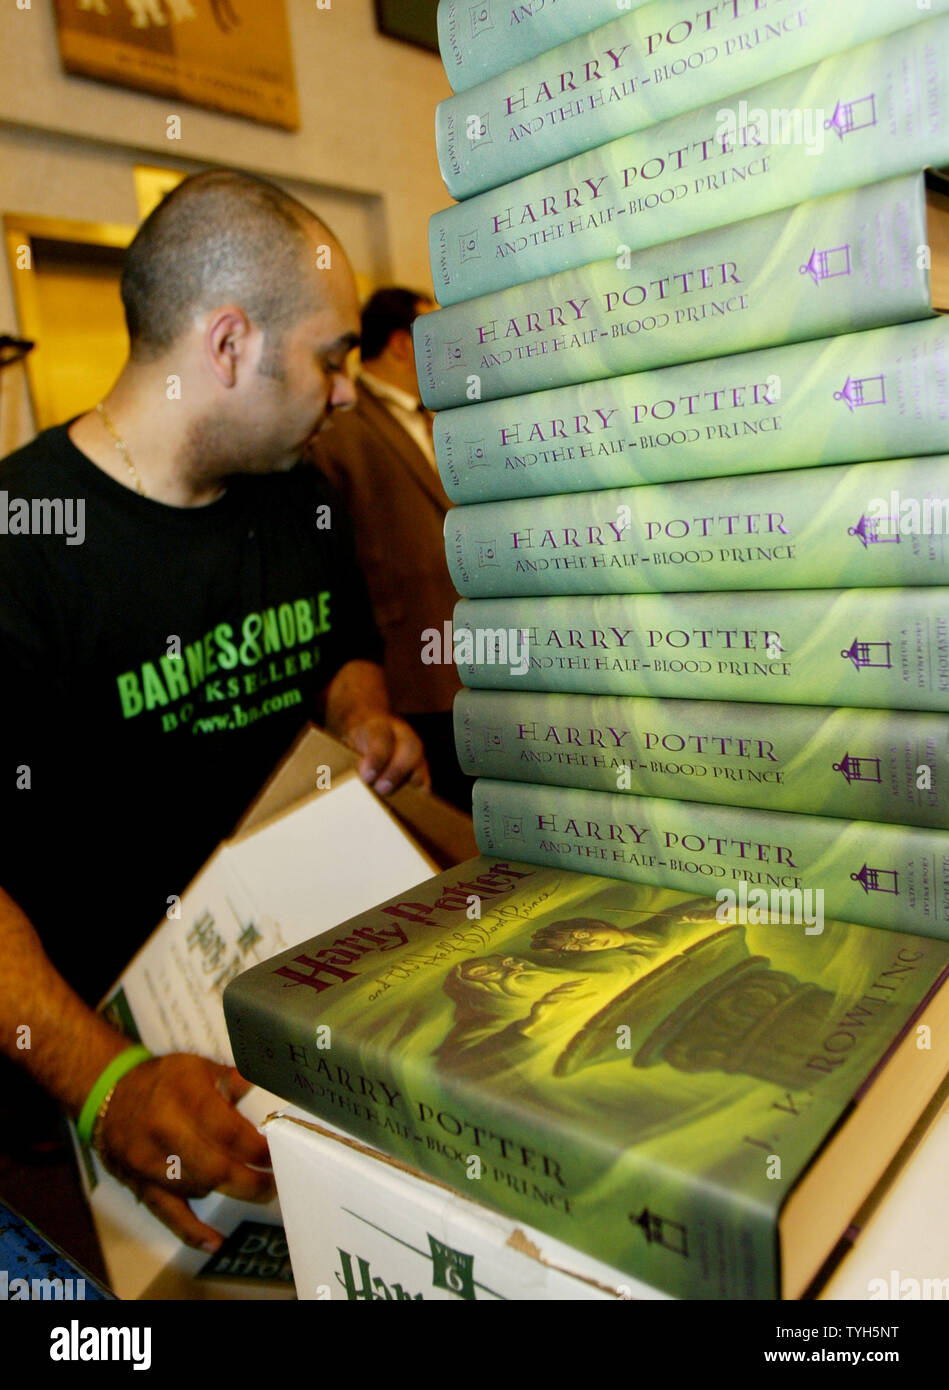 Thousands of copies of 'Harry Potter and the Half-Blood Prince,'  which was released at midnight, are unboxed and ready to be purchased  on July 15, 2005 in New York City. Thousands of bookstores nationwide stayed open late for the anticipated midnight release of the sixth Harry Potter book of which 10.8 million copies have already been printed. (UPI Photo/Monika Graff) Stock Photo